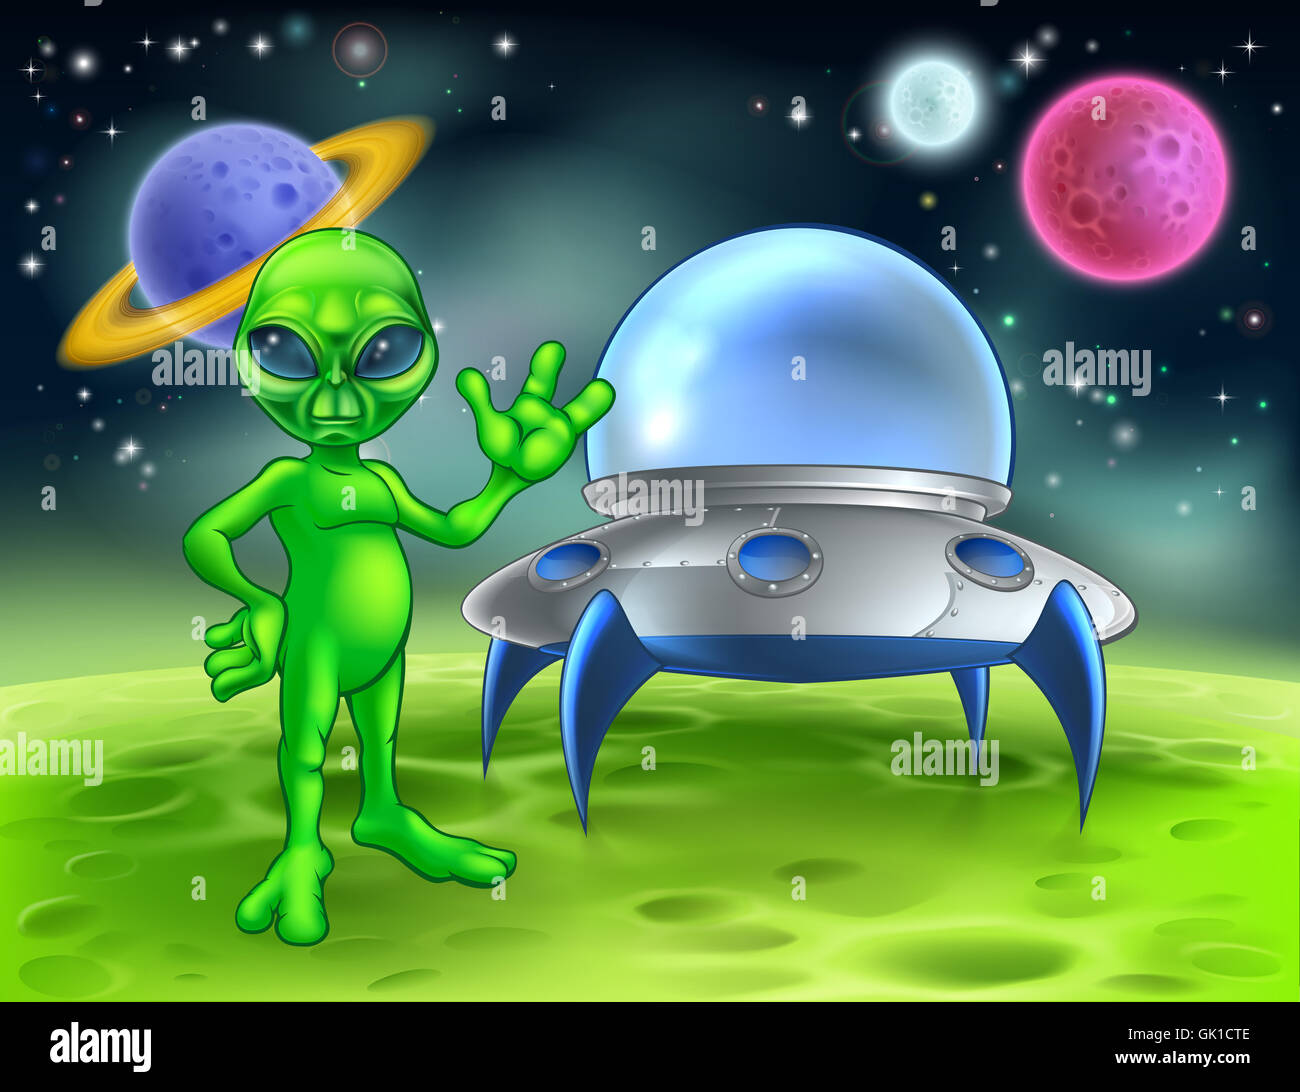 A little green man alien cartoon character waving in front of his flying saucer space ship on a planet or moon Stock Photo